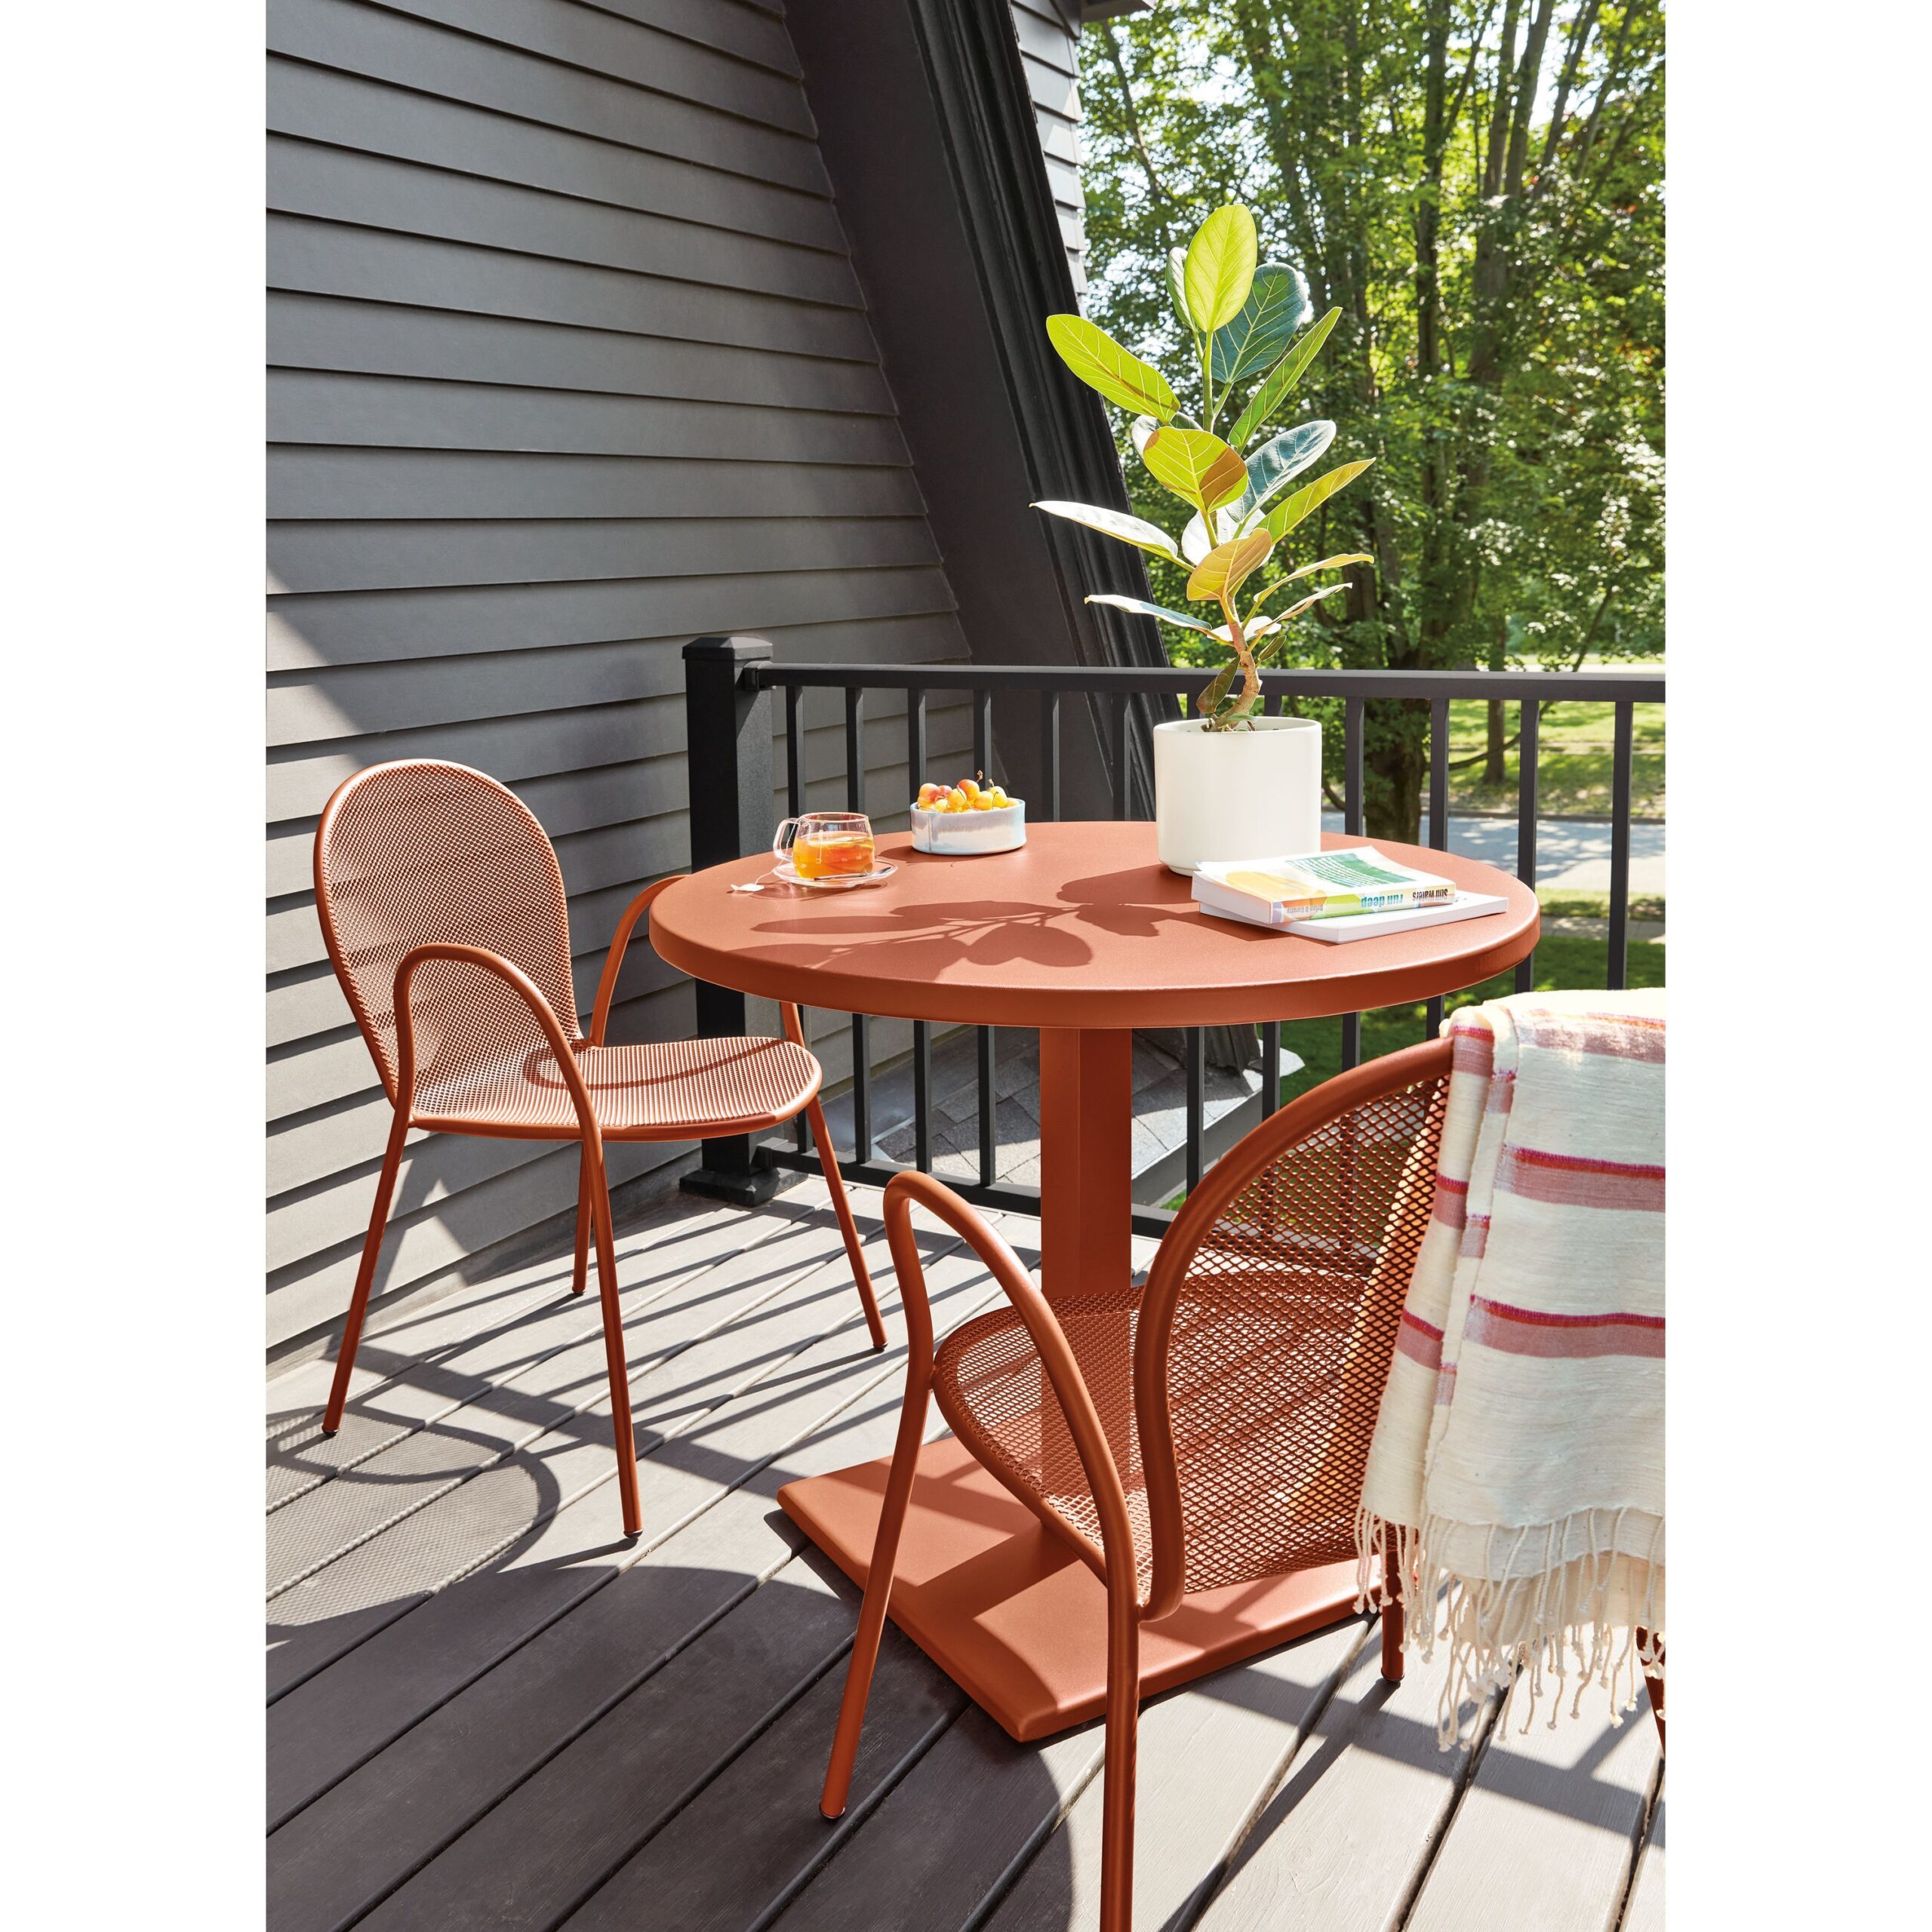 Stylish Round Patio Tables: The Perfect Addition to Your Outdoor Space